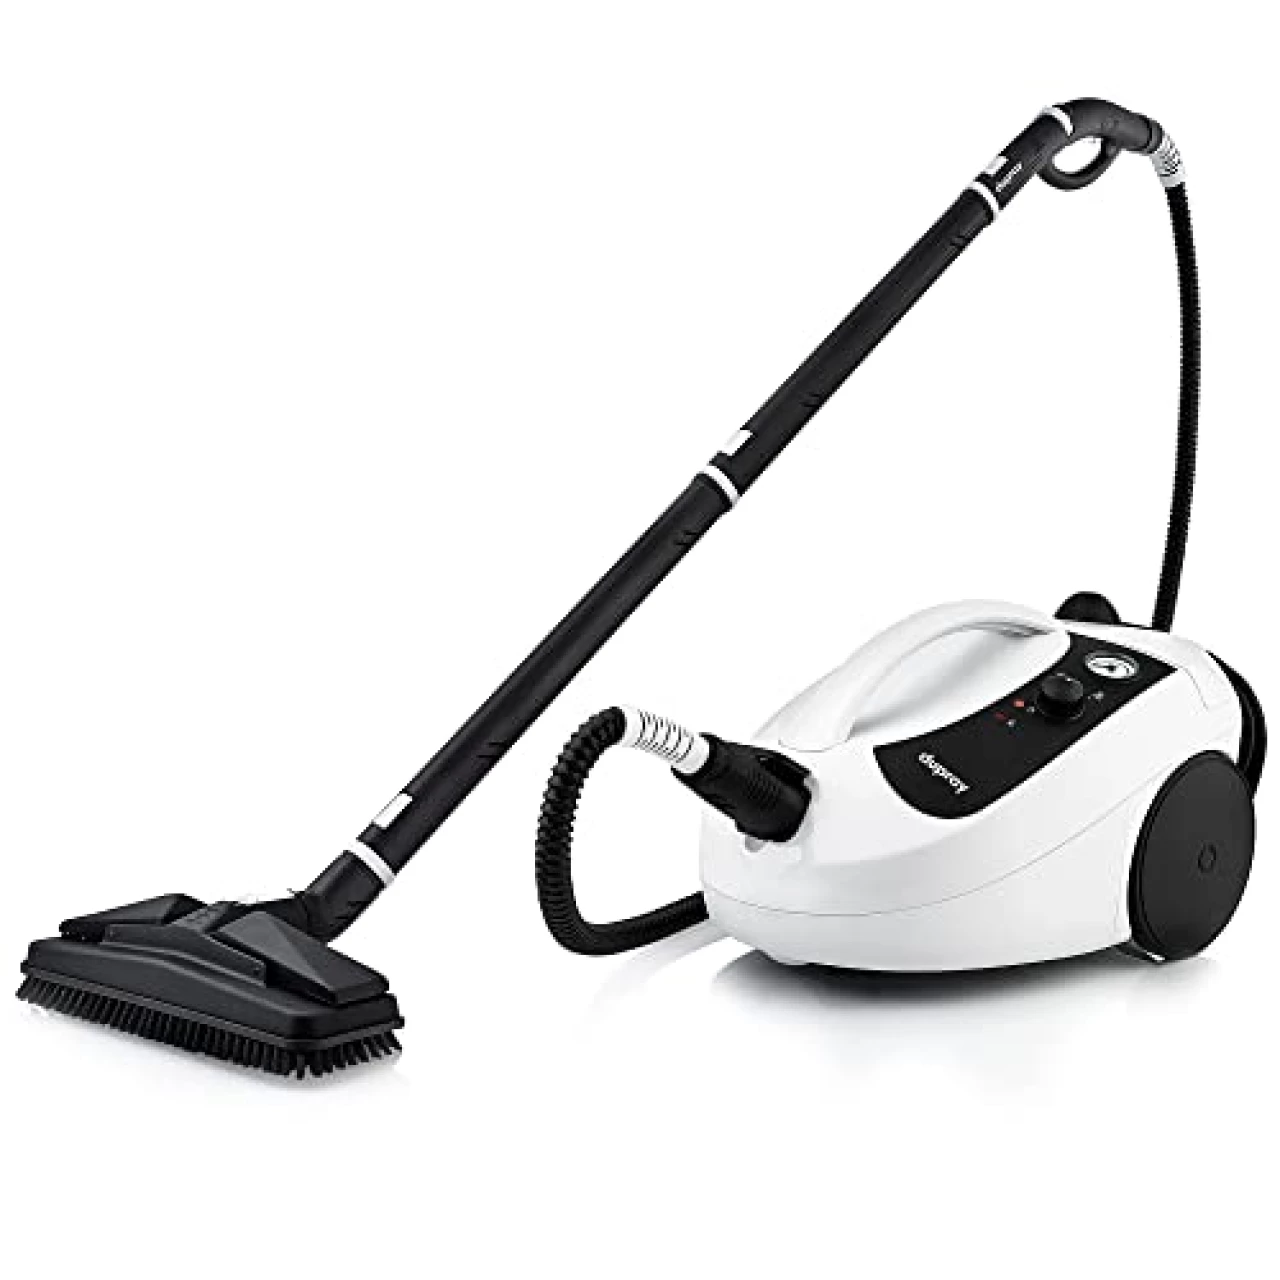 Dupray One Steam Cleaner- Portable, All-Purpose, Disinfecting, Chemical-Free Floor Steamer &amp; Tile Cleaner